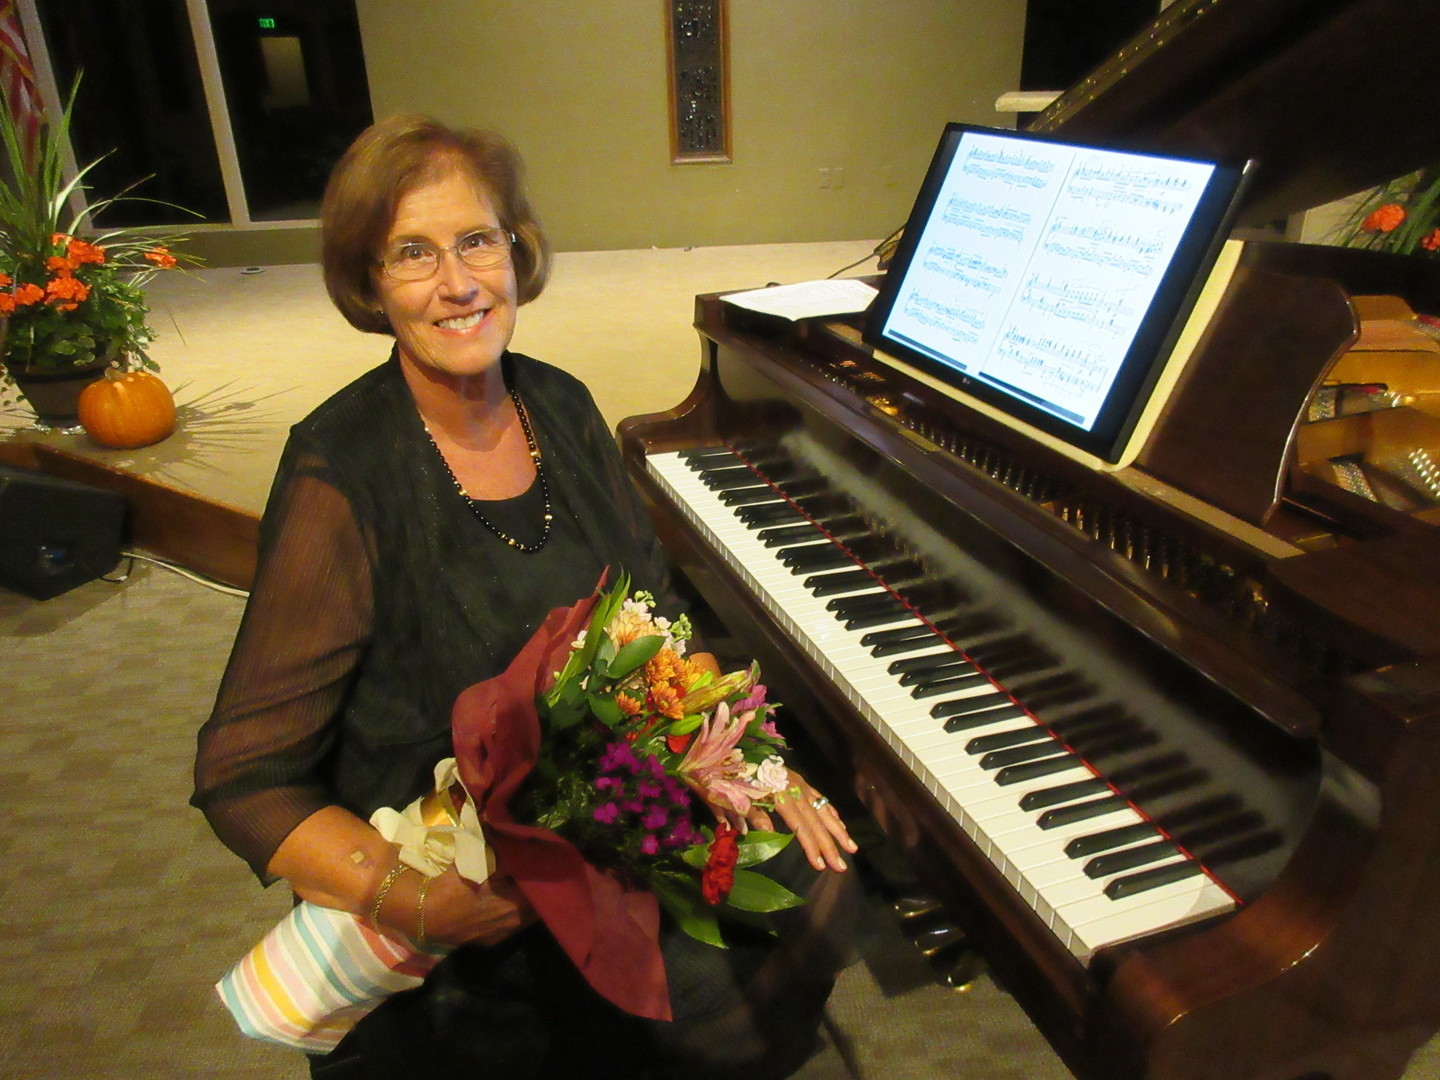 Piano Recital: SHALL WE DANCE?! by Dr. Gena Bedrosian, Naples, Florida, United States